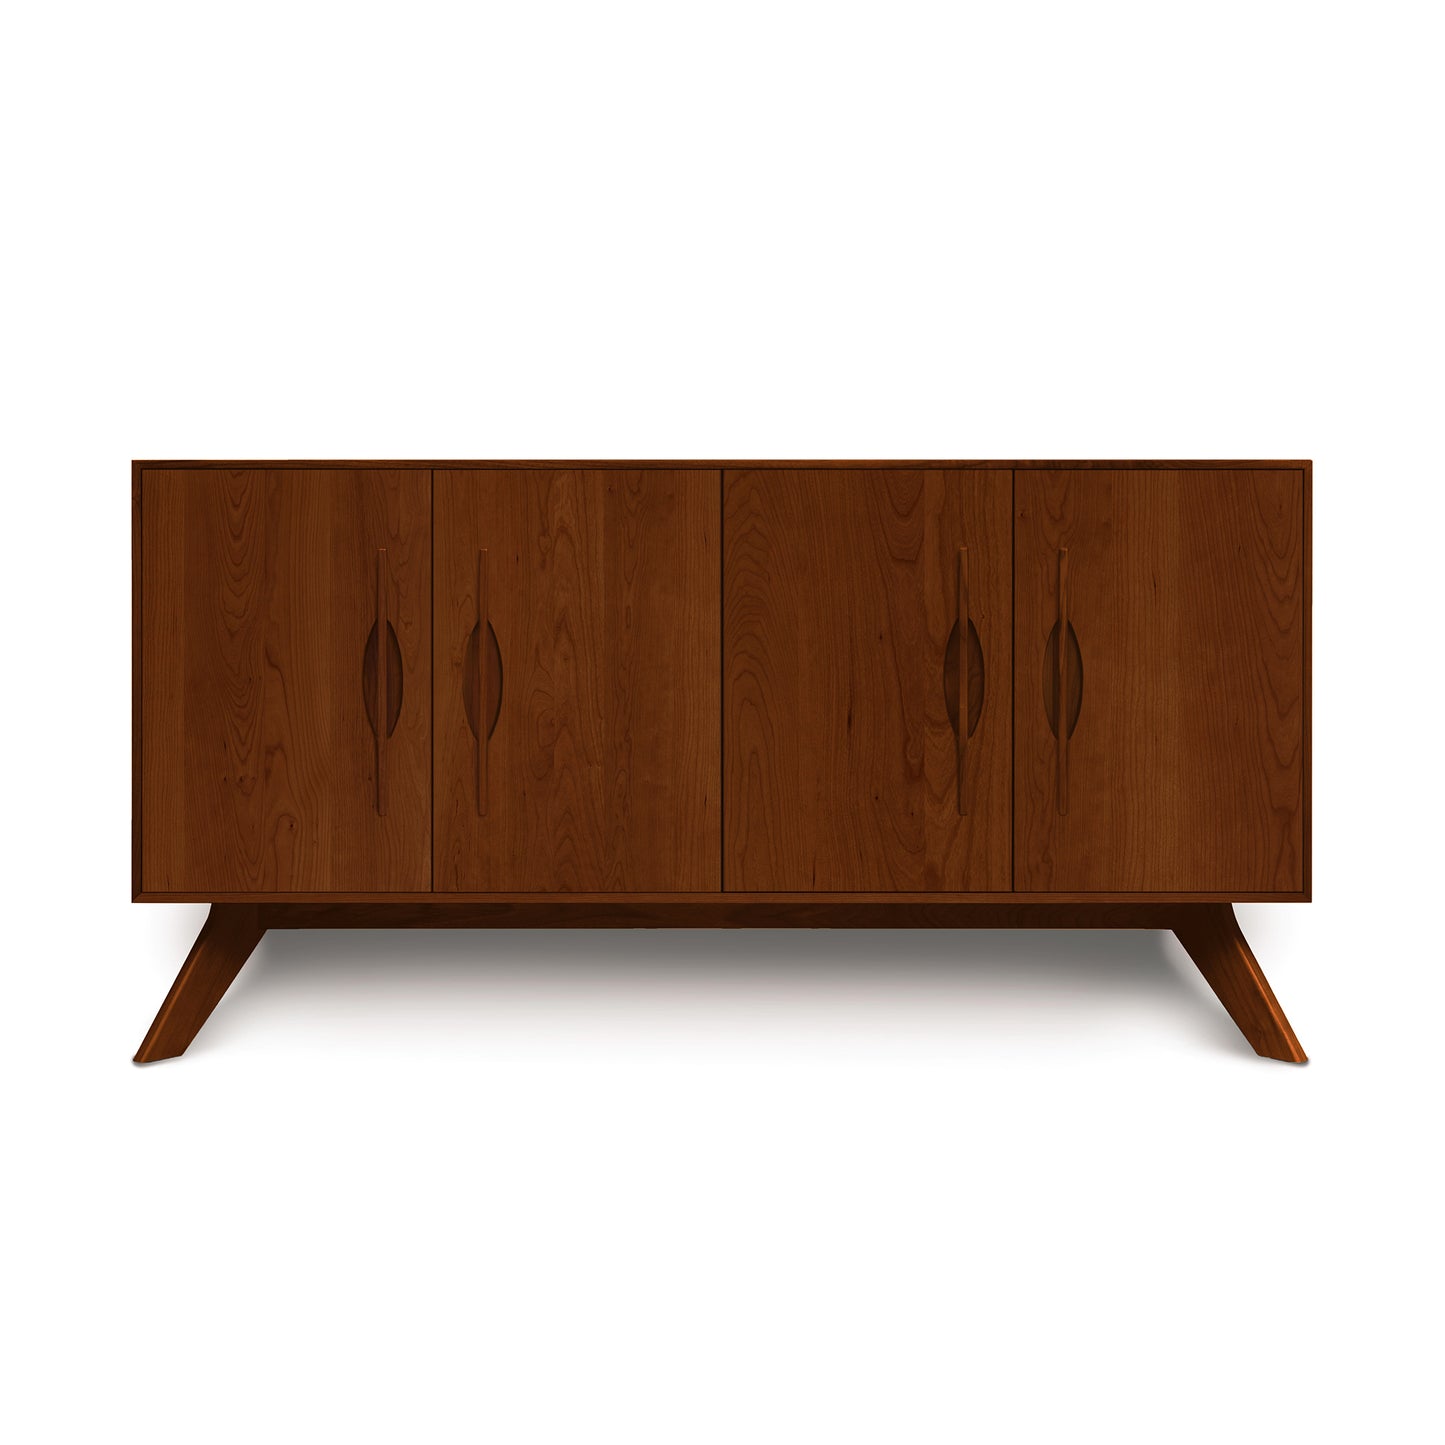 A Copeland Furniture Audrey 4-Door Buffet with angled legs against a white background.